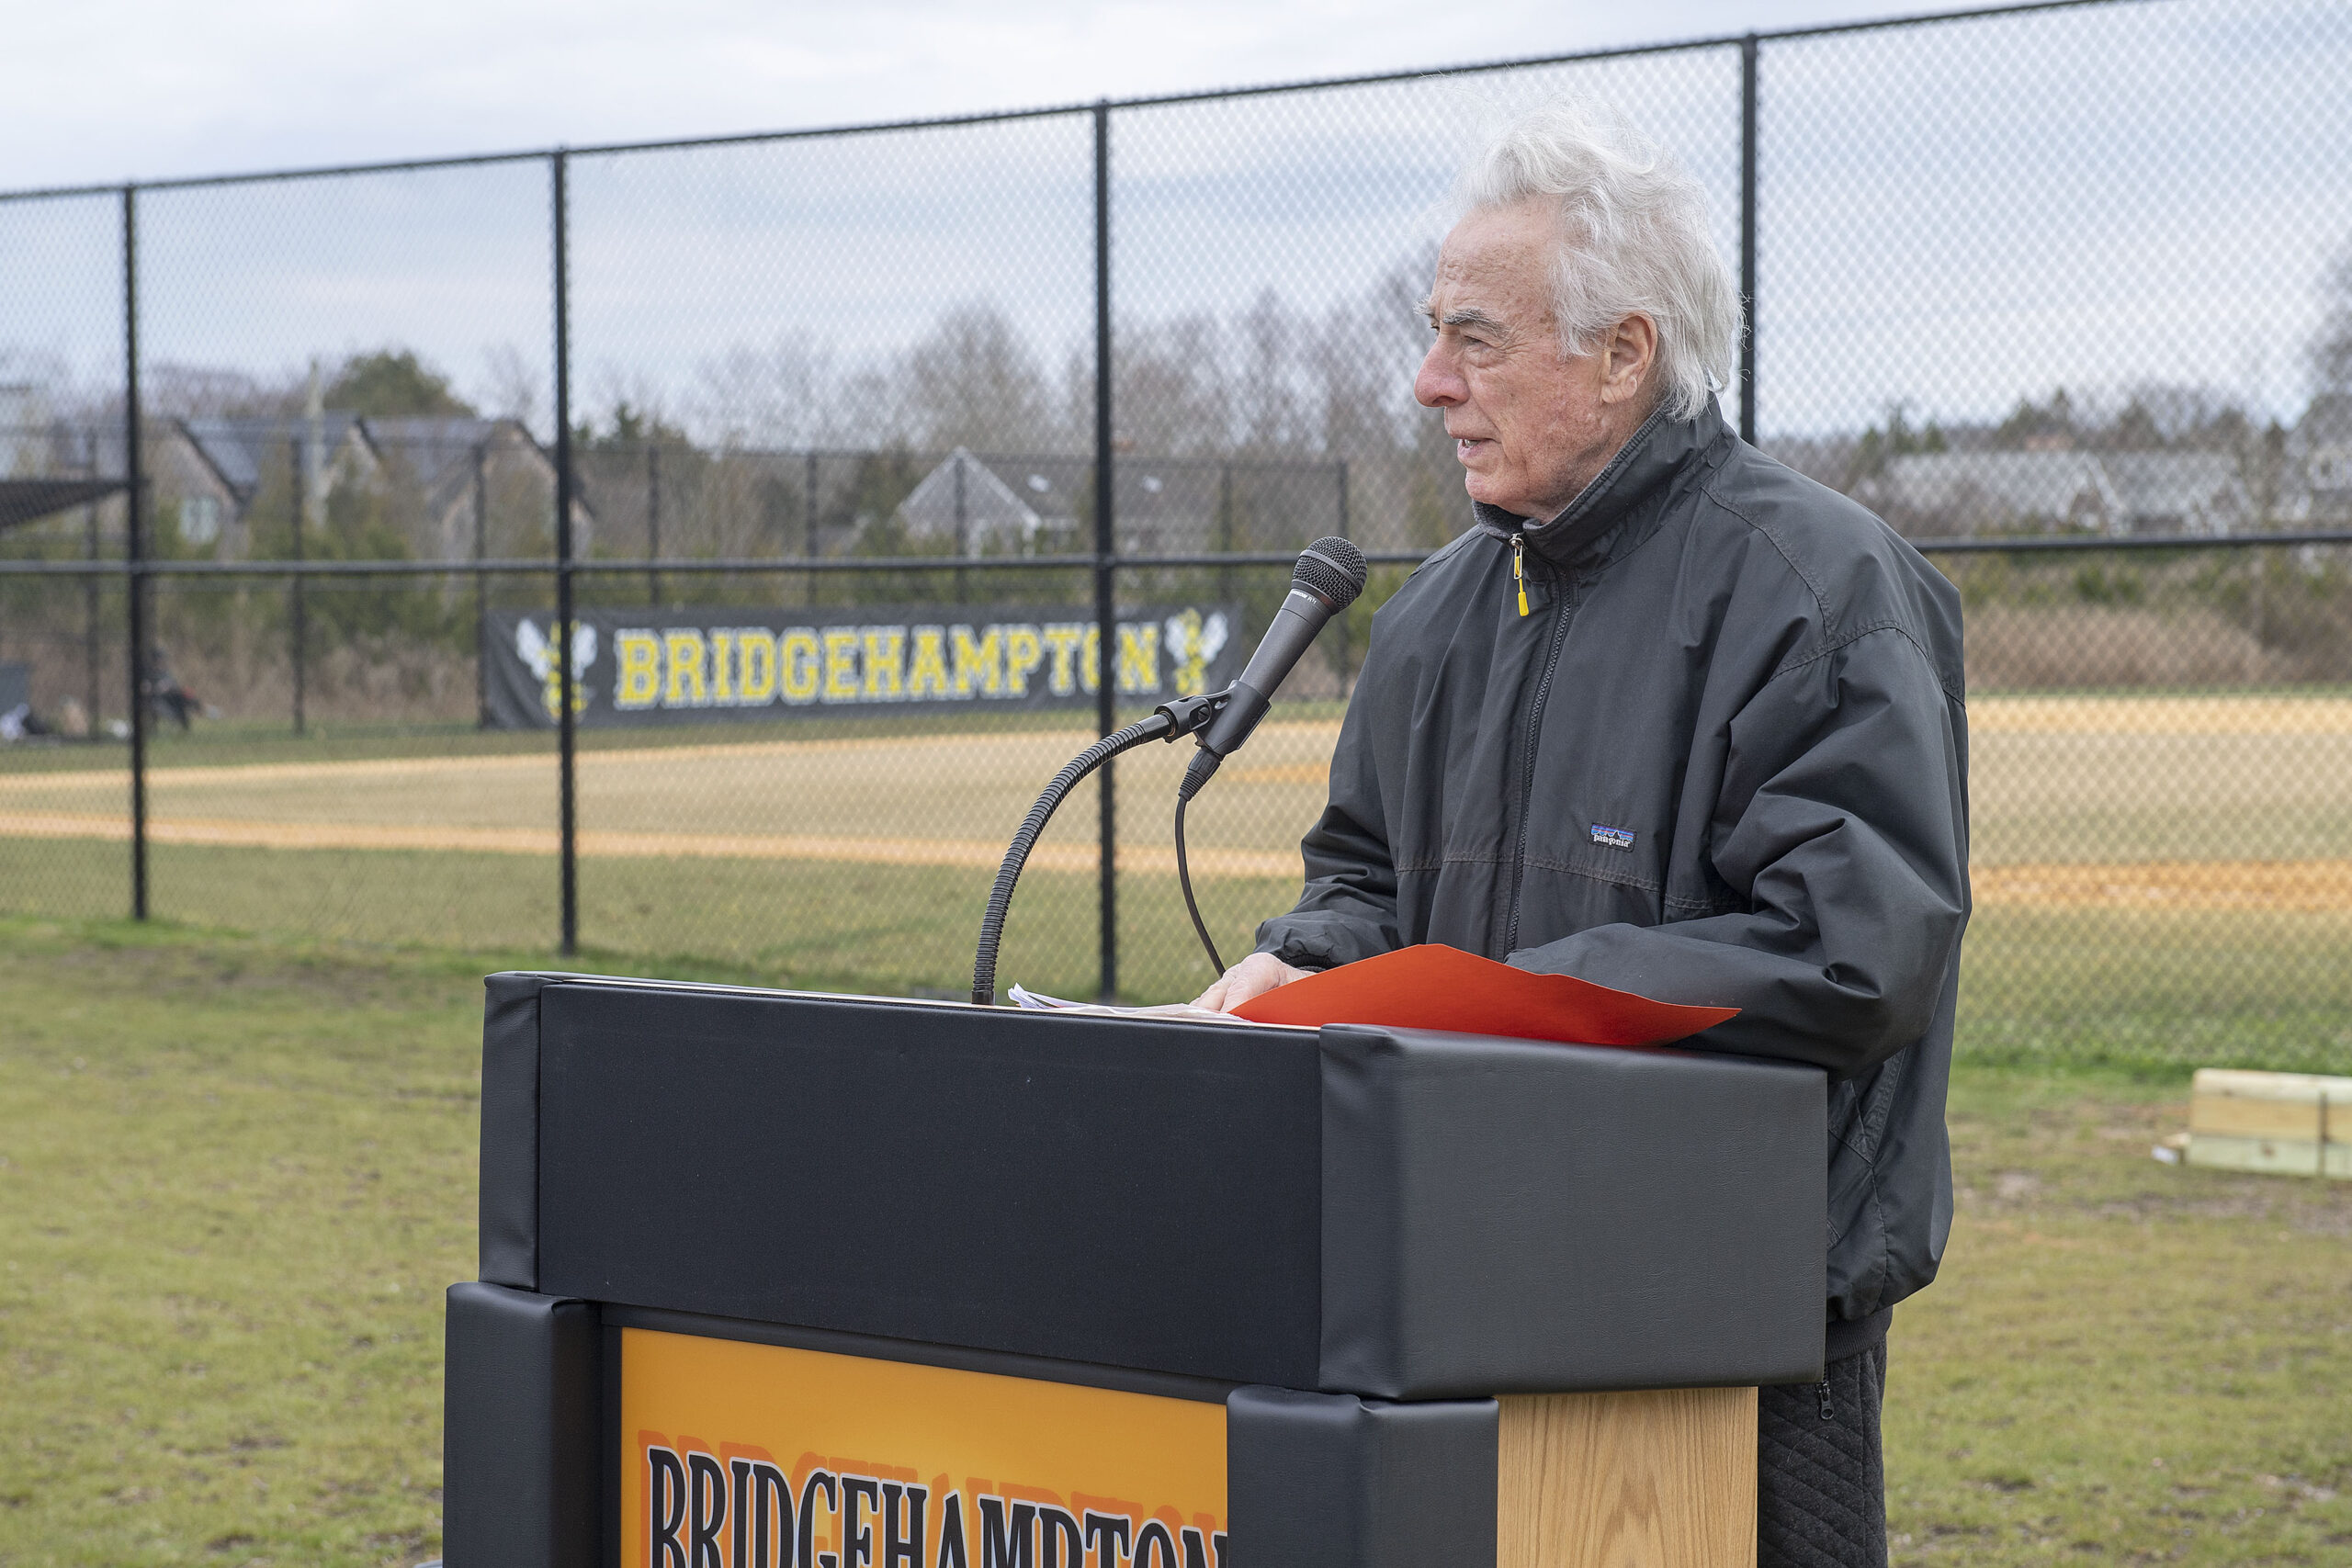 Dan Shedrick, a friend of baseball legend Carl Yastrzemski, reads aloud a message from the former Bridgehampton native during a dedication ceremony prior to the start of Tuesday's game.   MICHAEL HELLER